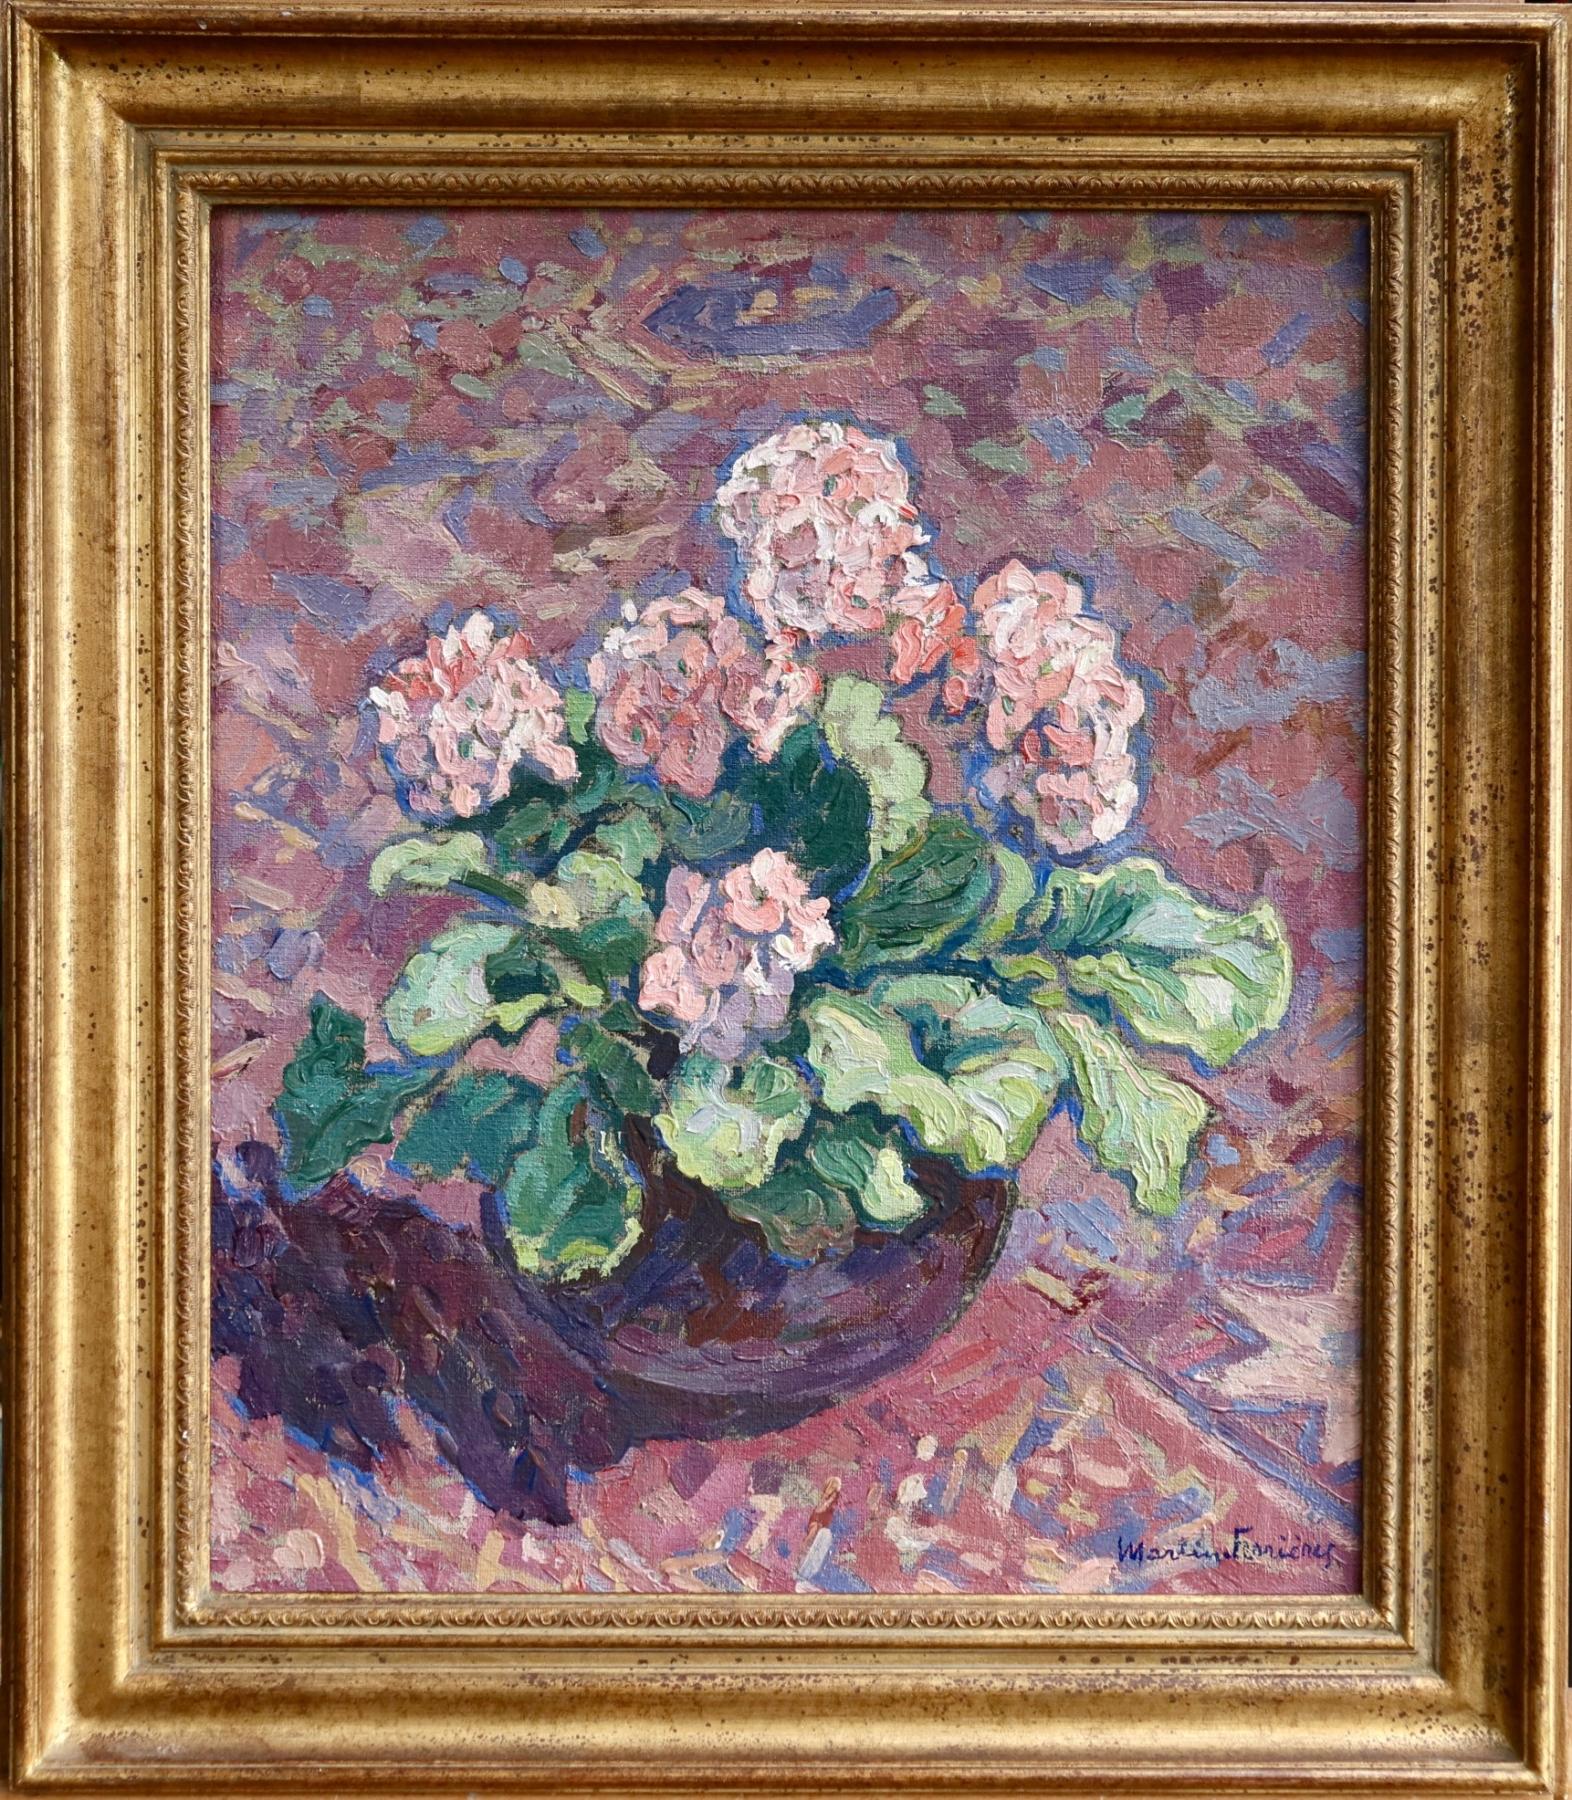 Primevere - 20th Century Oil, Still Life of Flowers by Jacques Martin-Ferrieres - Painting by Jacques Martin-Ferrières